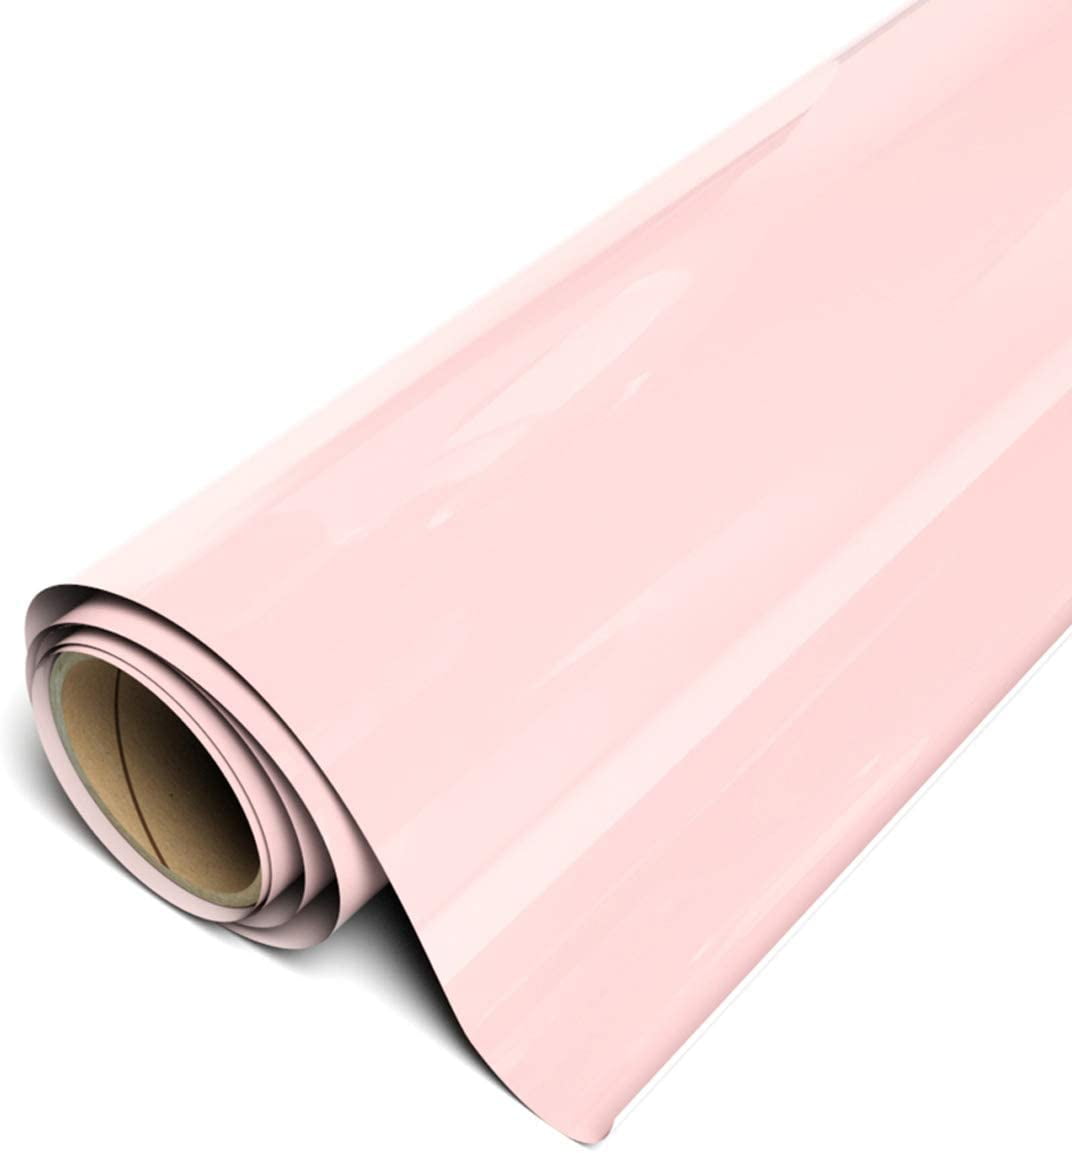 Passion Pink Siser Easyweed Stretch 15 x 3 Iron on Heat Transfer Vinyl Roll Coaches World